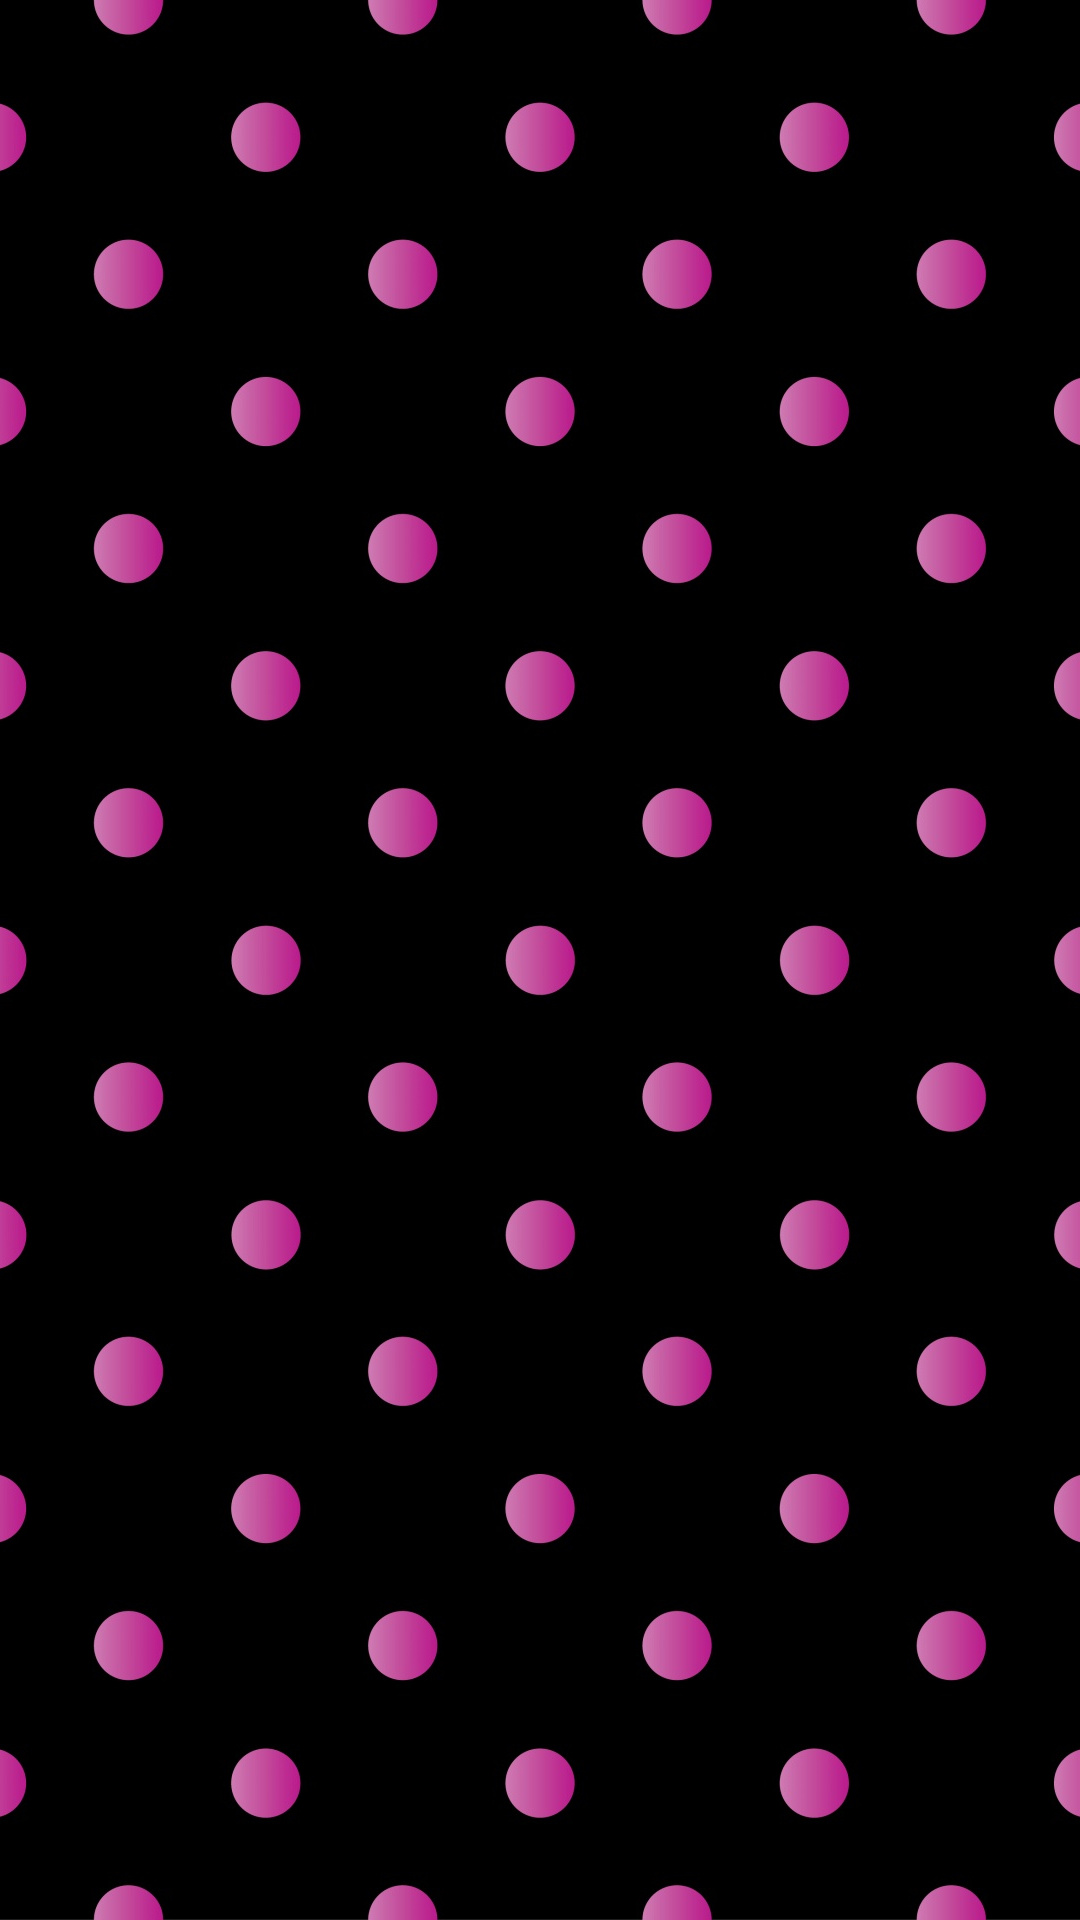 Polka dots pattern, Pink and black background, Abstract wallpaper, Supreme style, 1080x1920 Full HD Handy